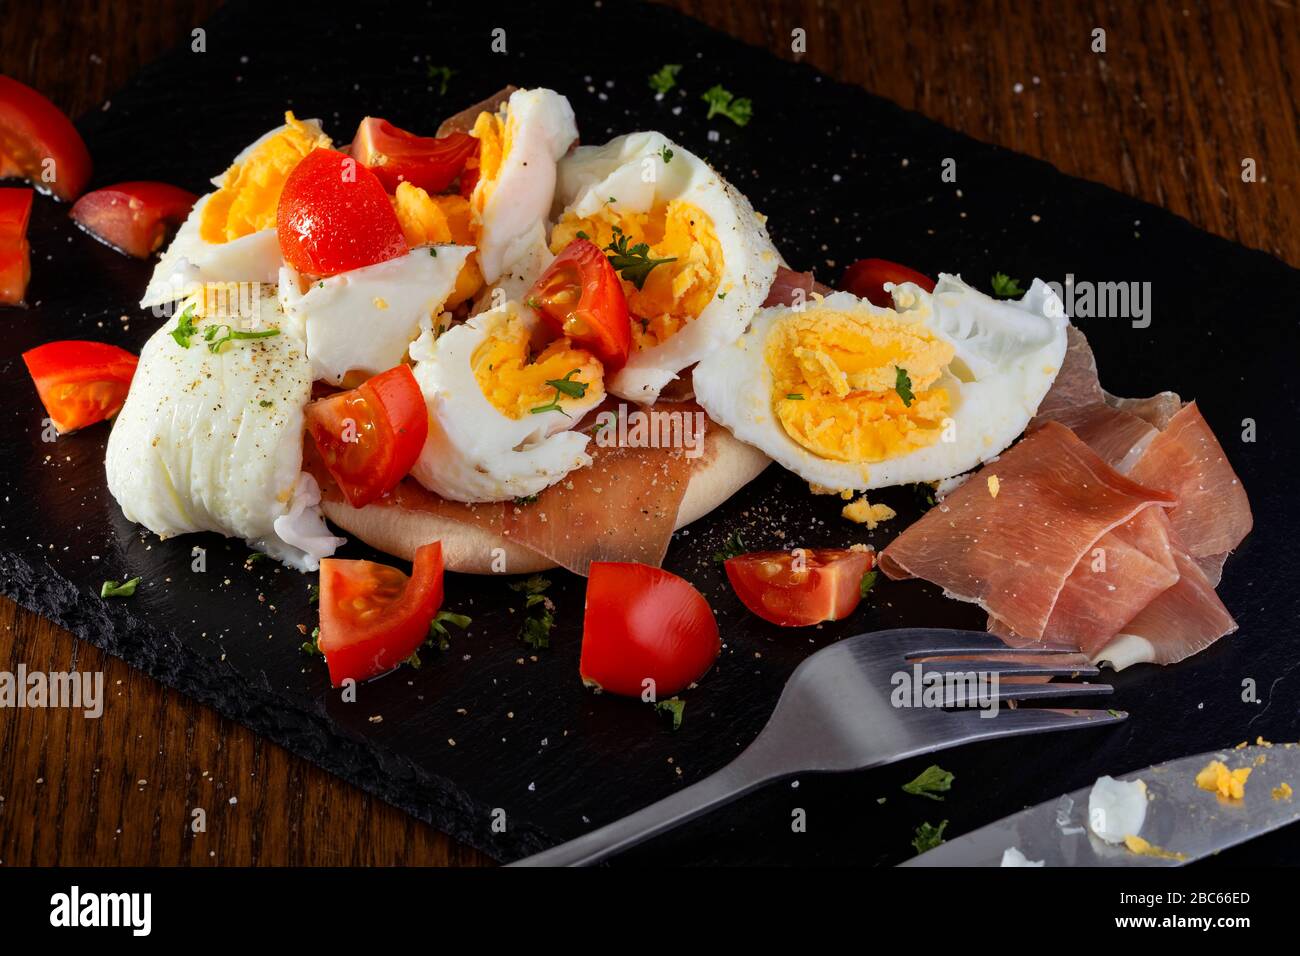 Eating boiled egg with parma ham and cherry tomatoes Stock Photo